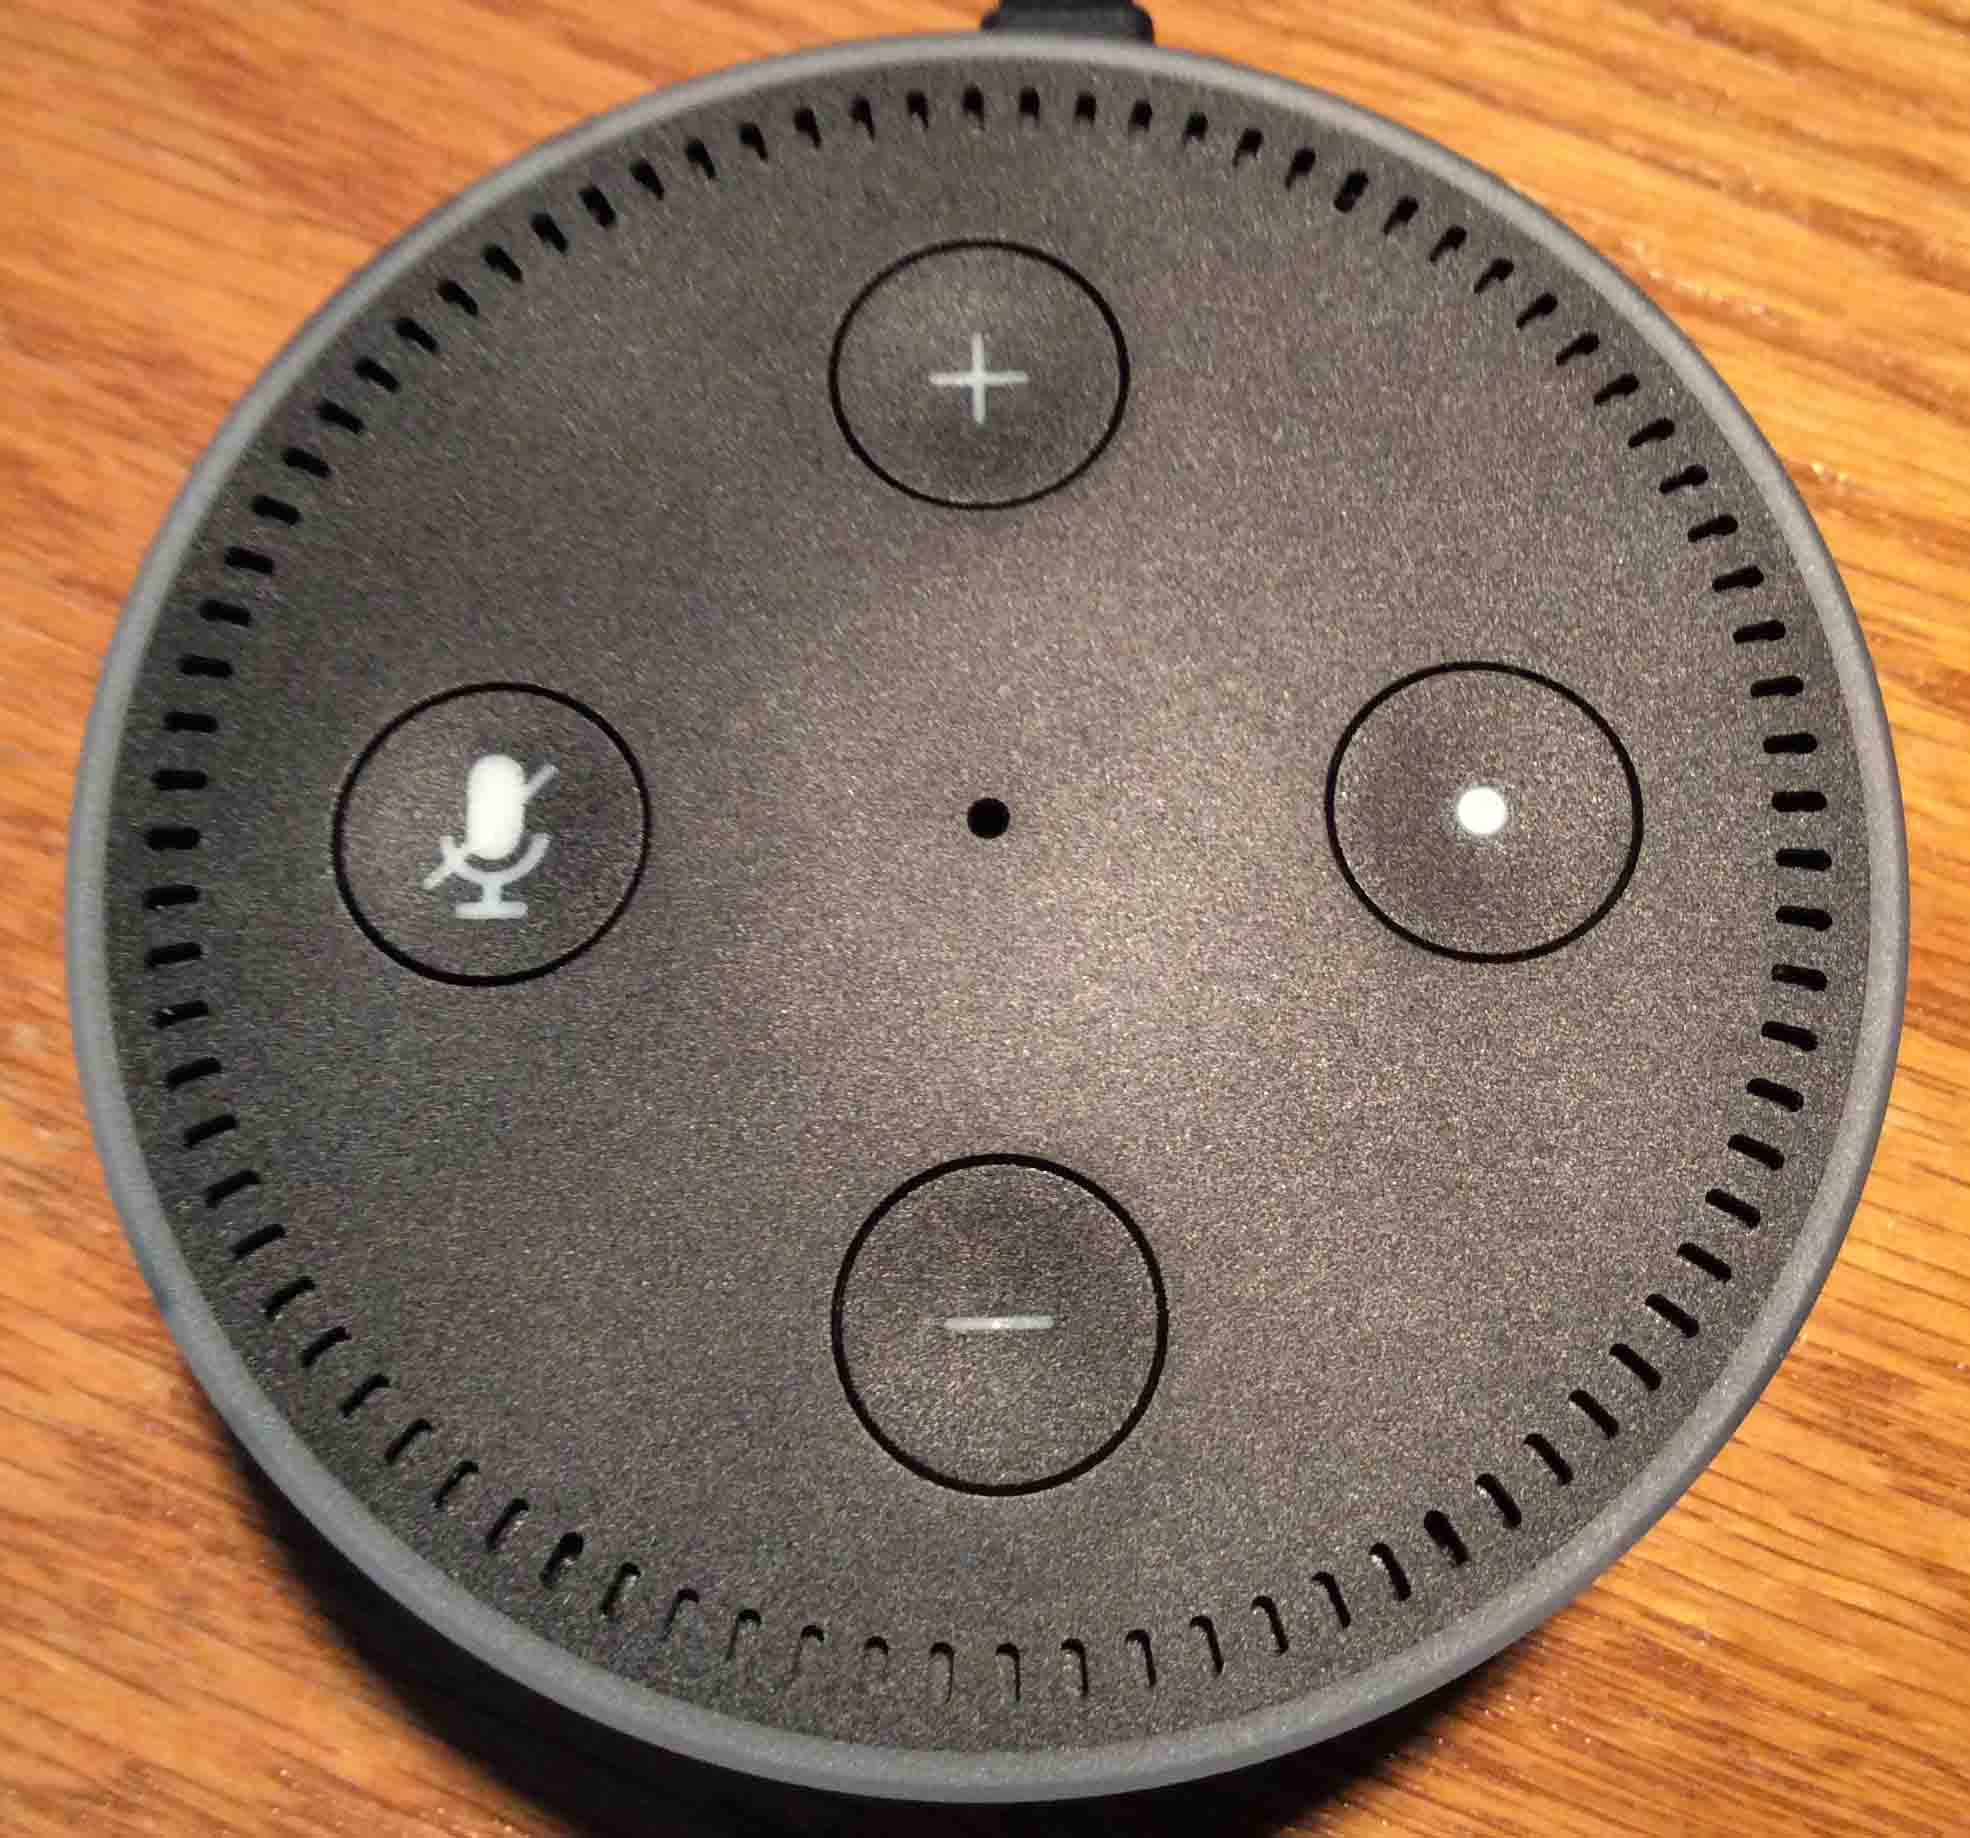 Echo Dot 2 Buttons Guide, How to Use Them - Tom's Tek Stop